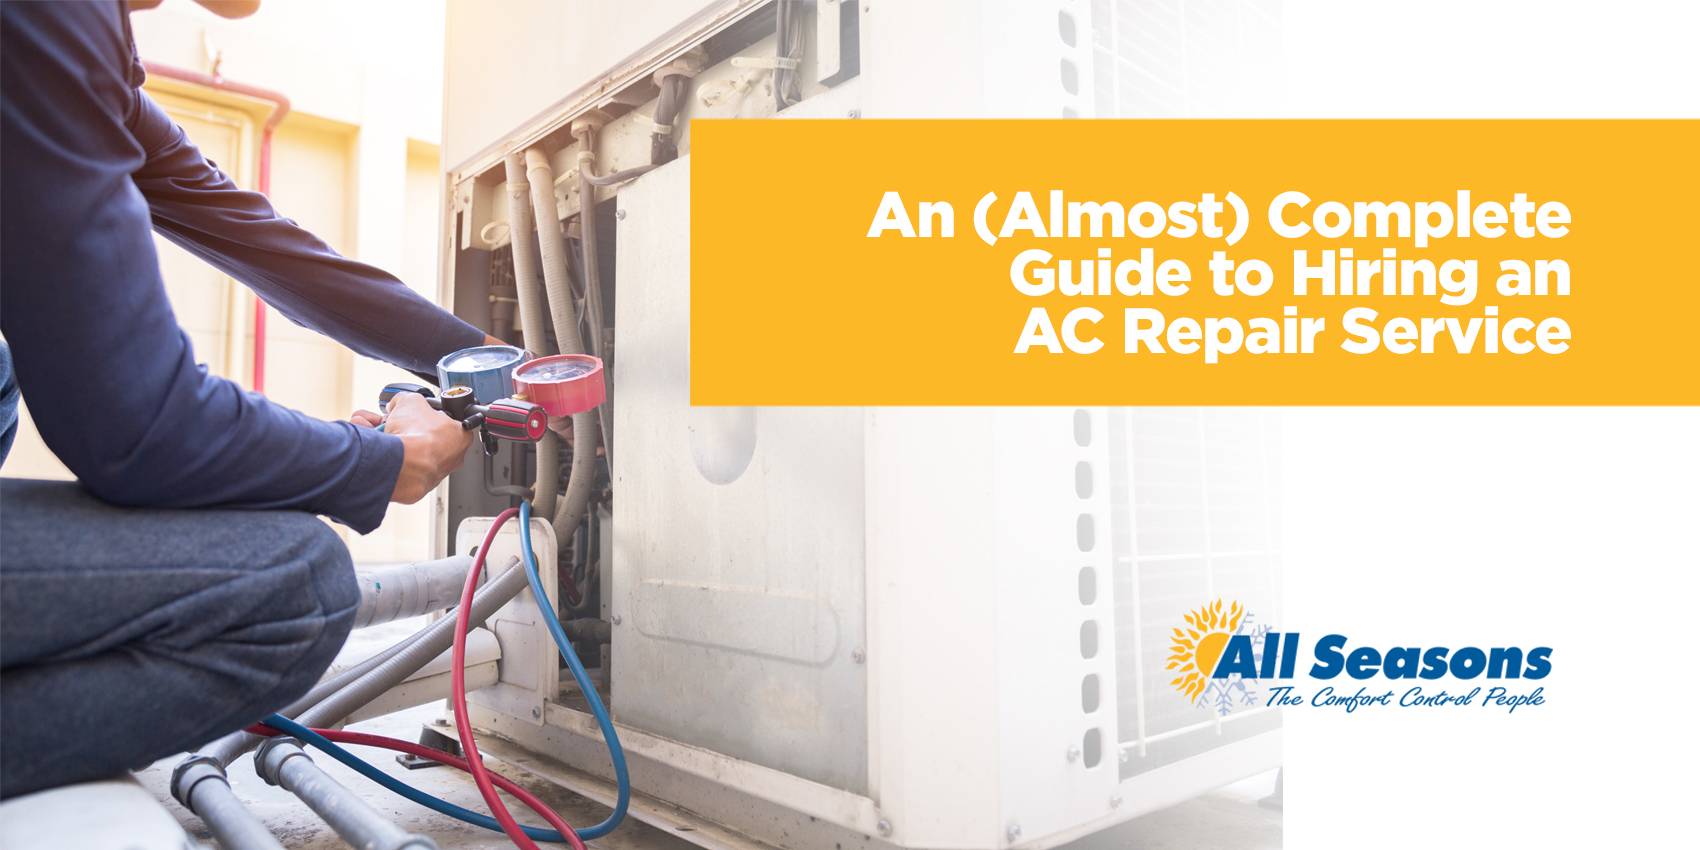 An (Almost) Complete Guide to Hiring an AC Repair Service